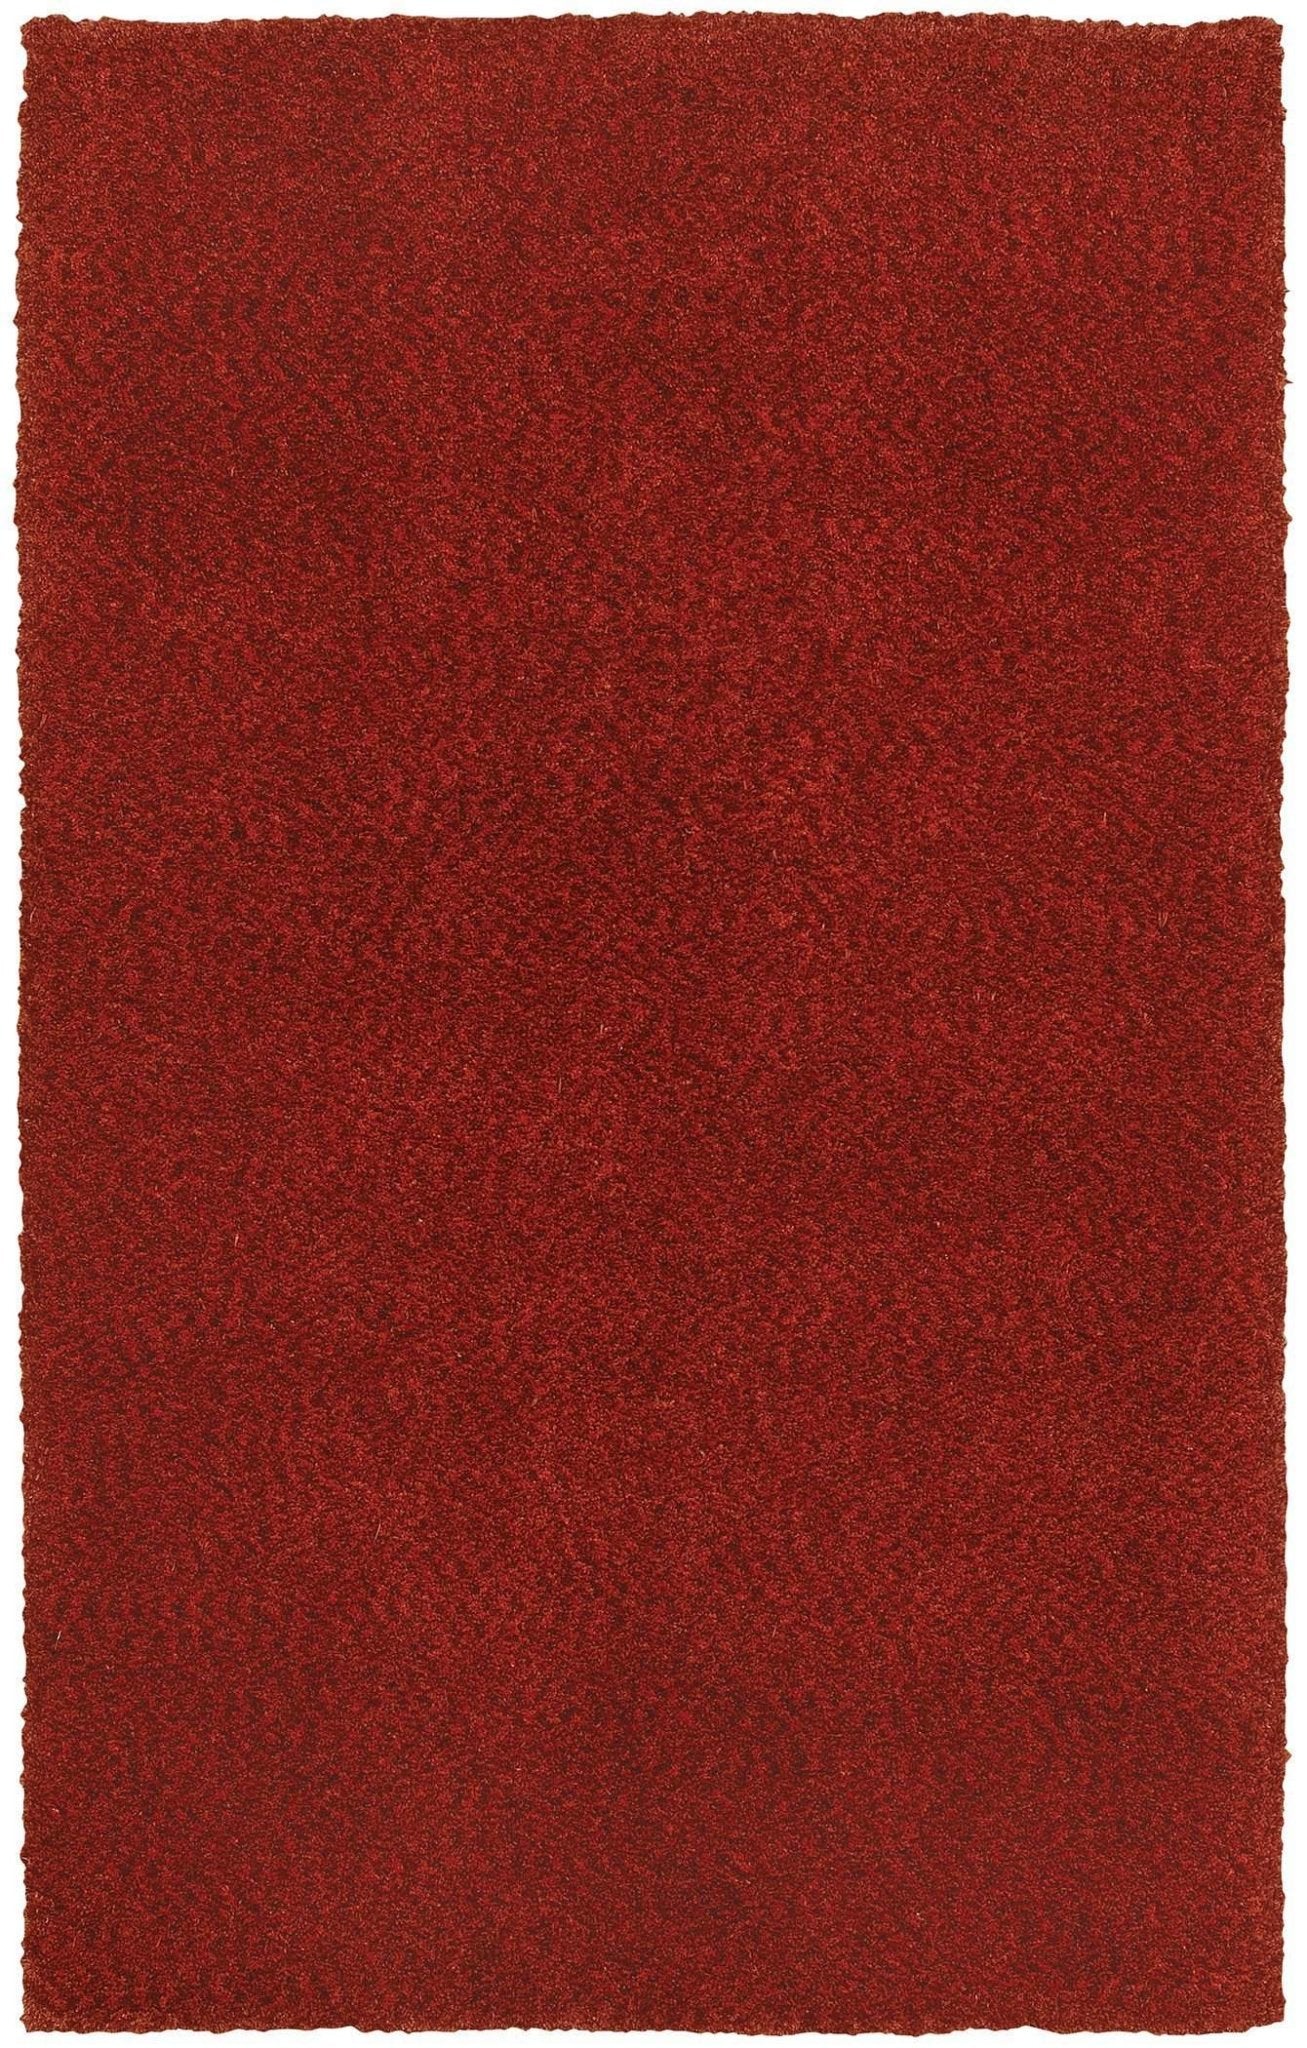 Heavenly 73406 Red/ Red Rug - Rug & Home